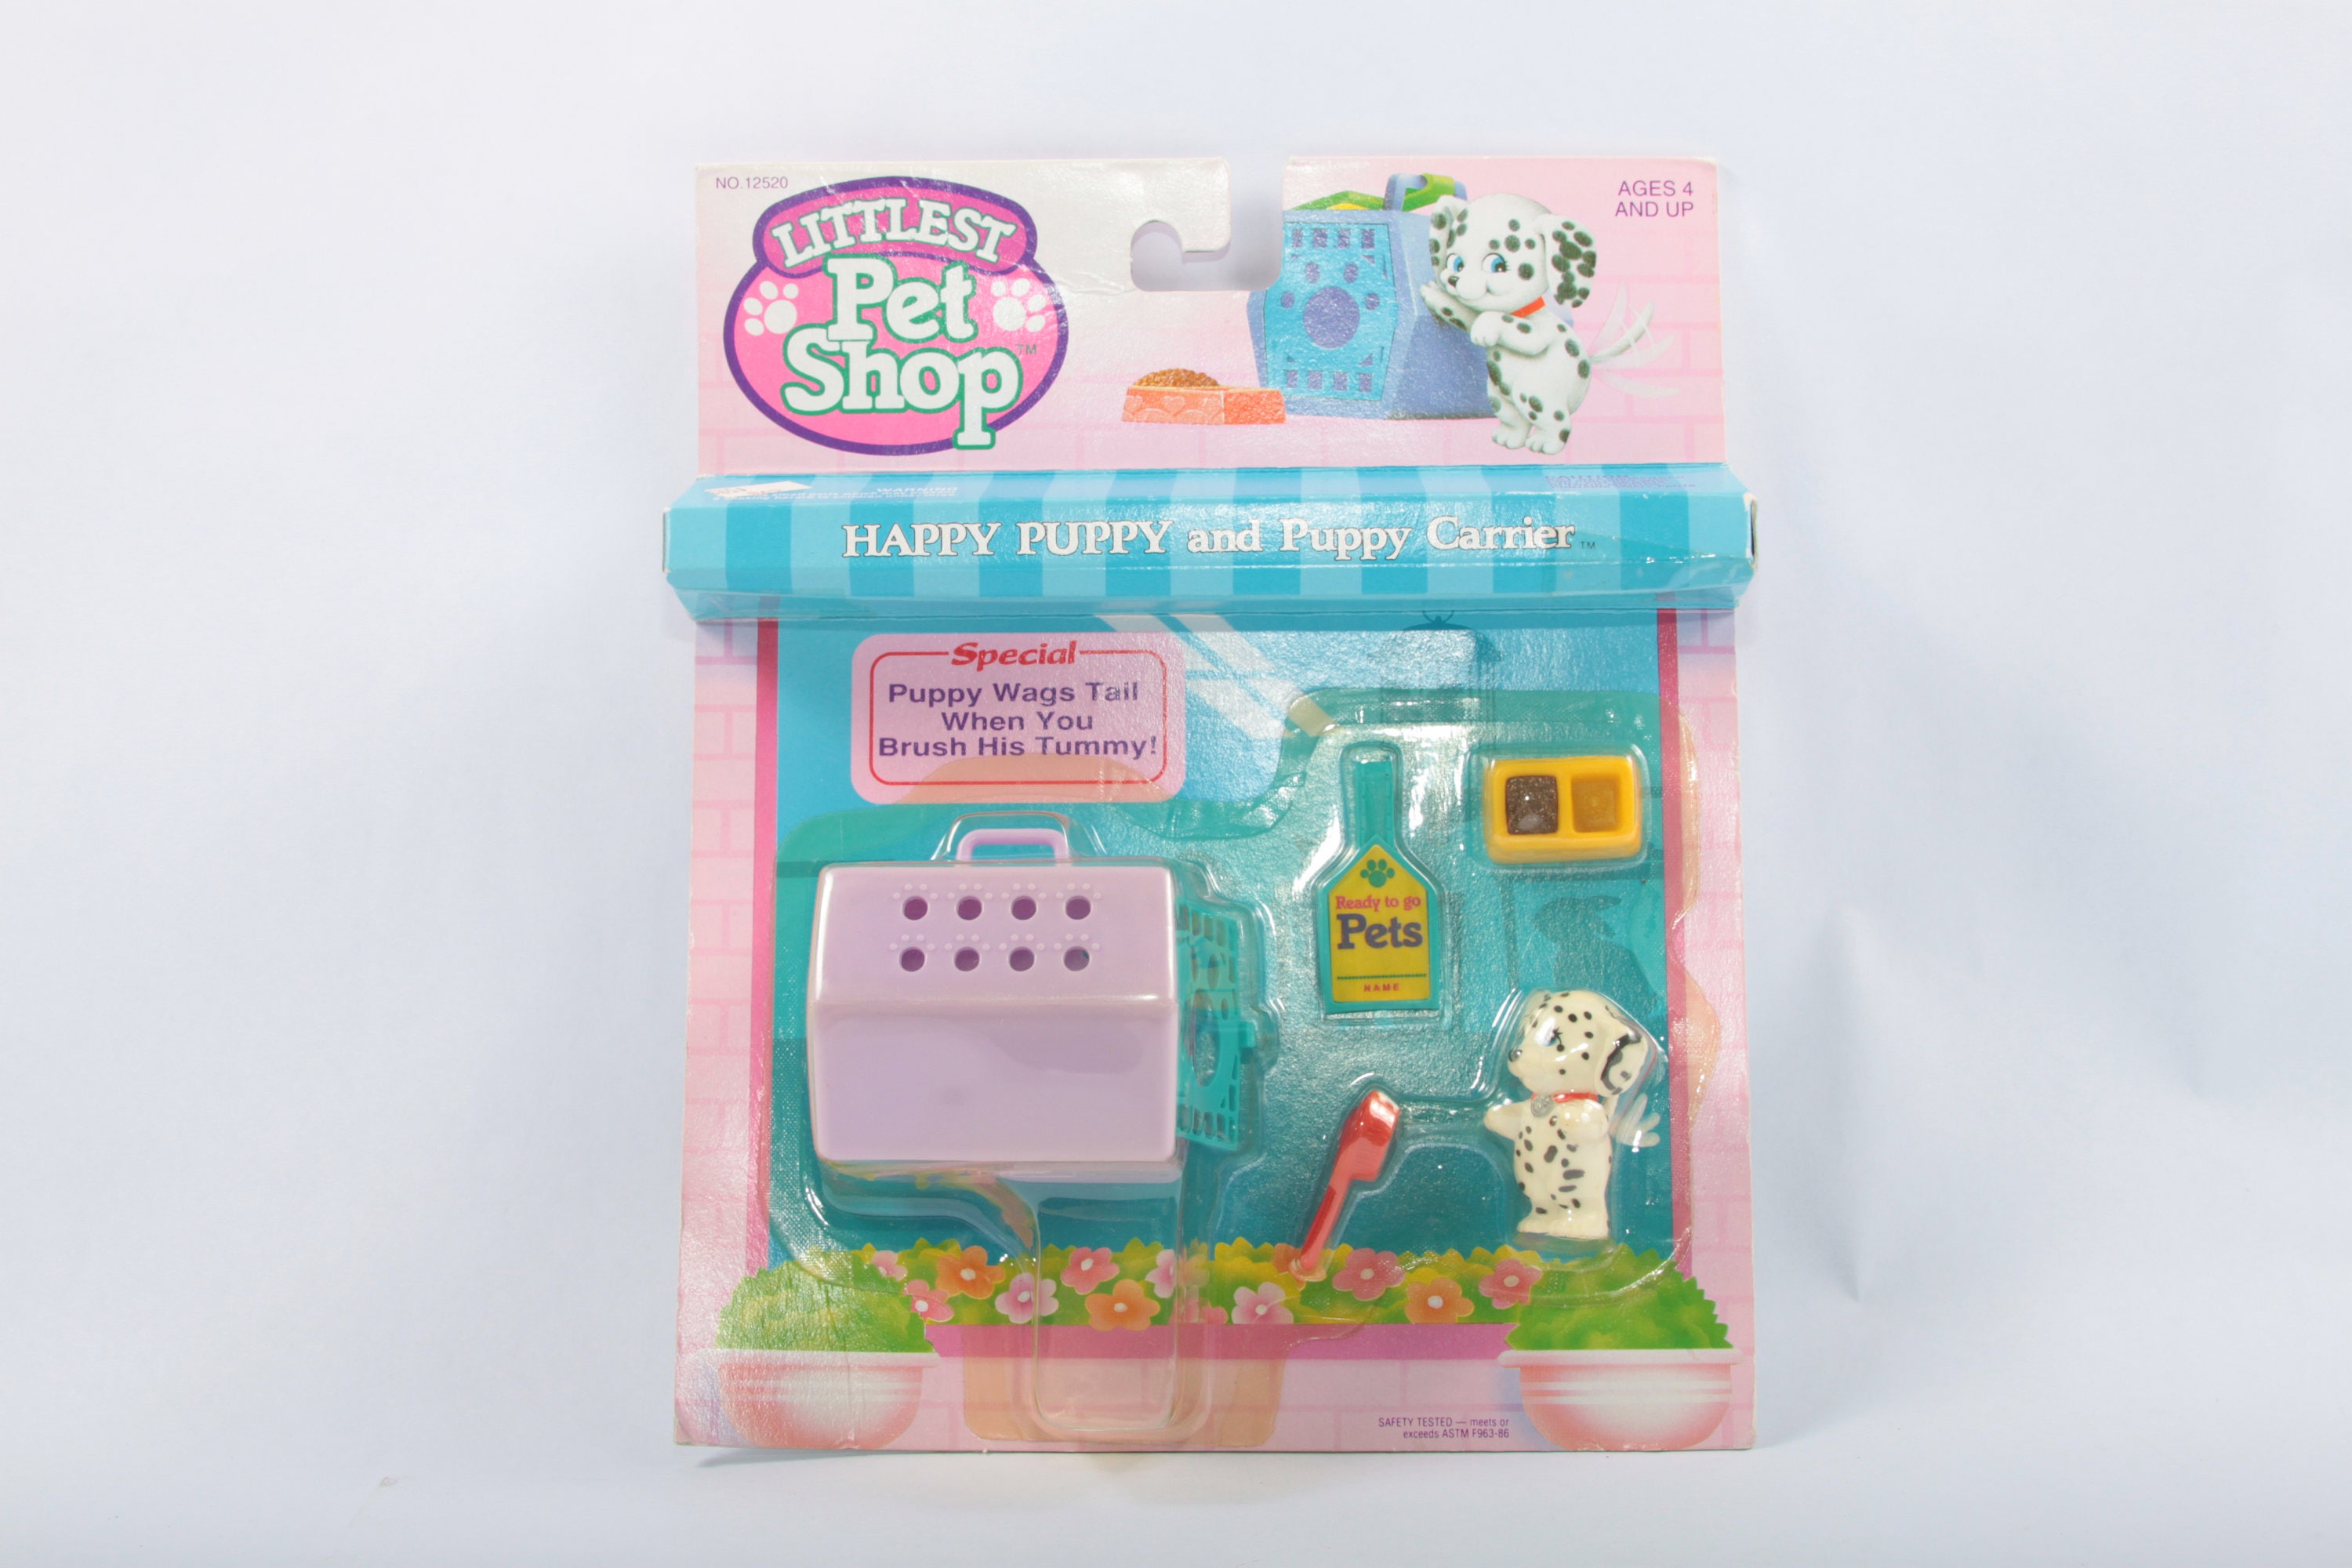 Littlest Pet Shop Kenner Happy Puppy and Puppy Carrier Vintage Etsy 日本